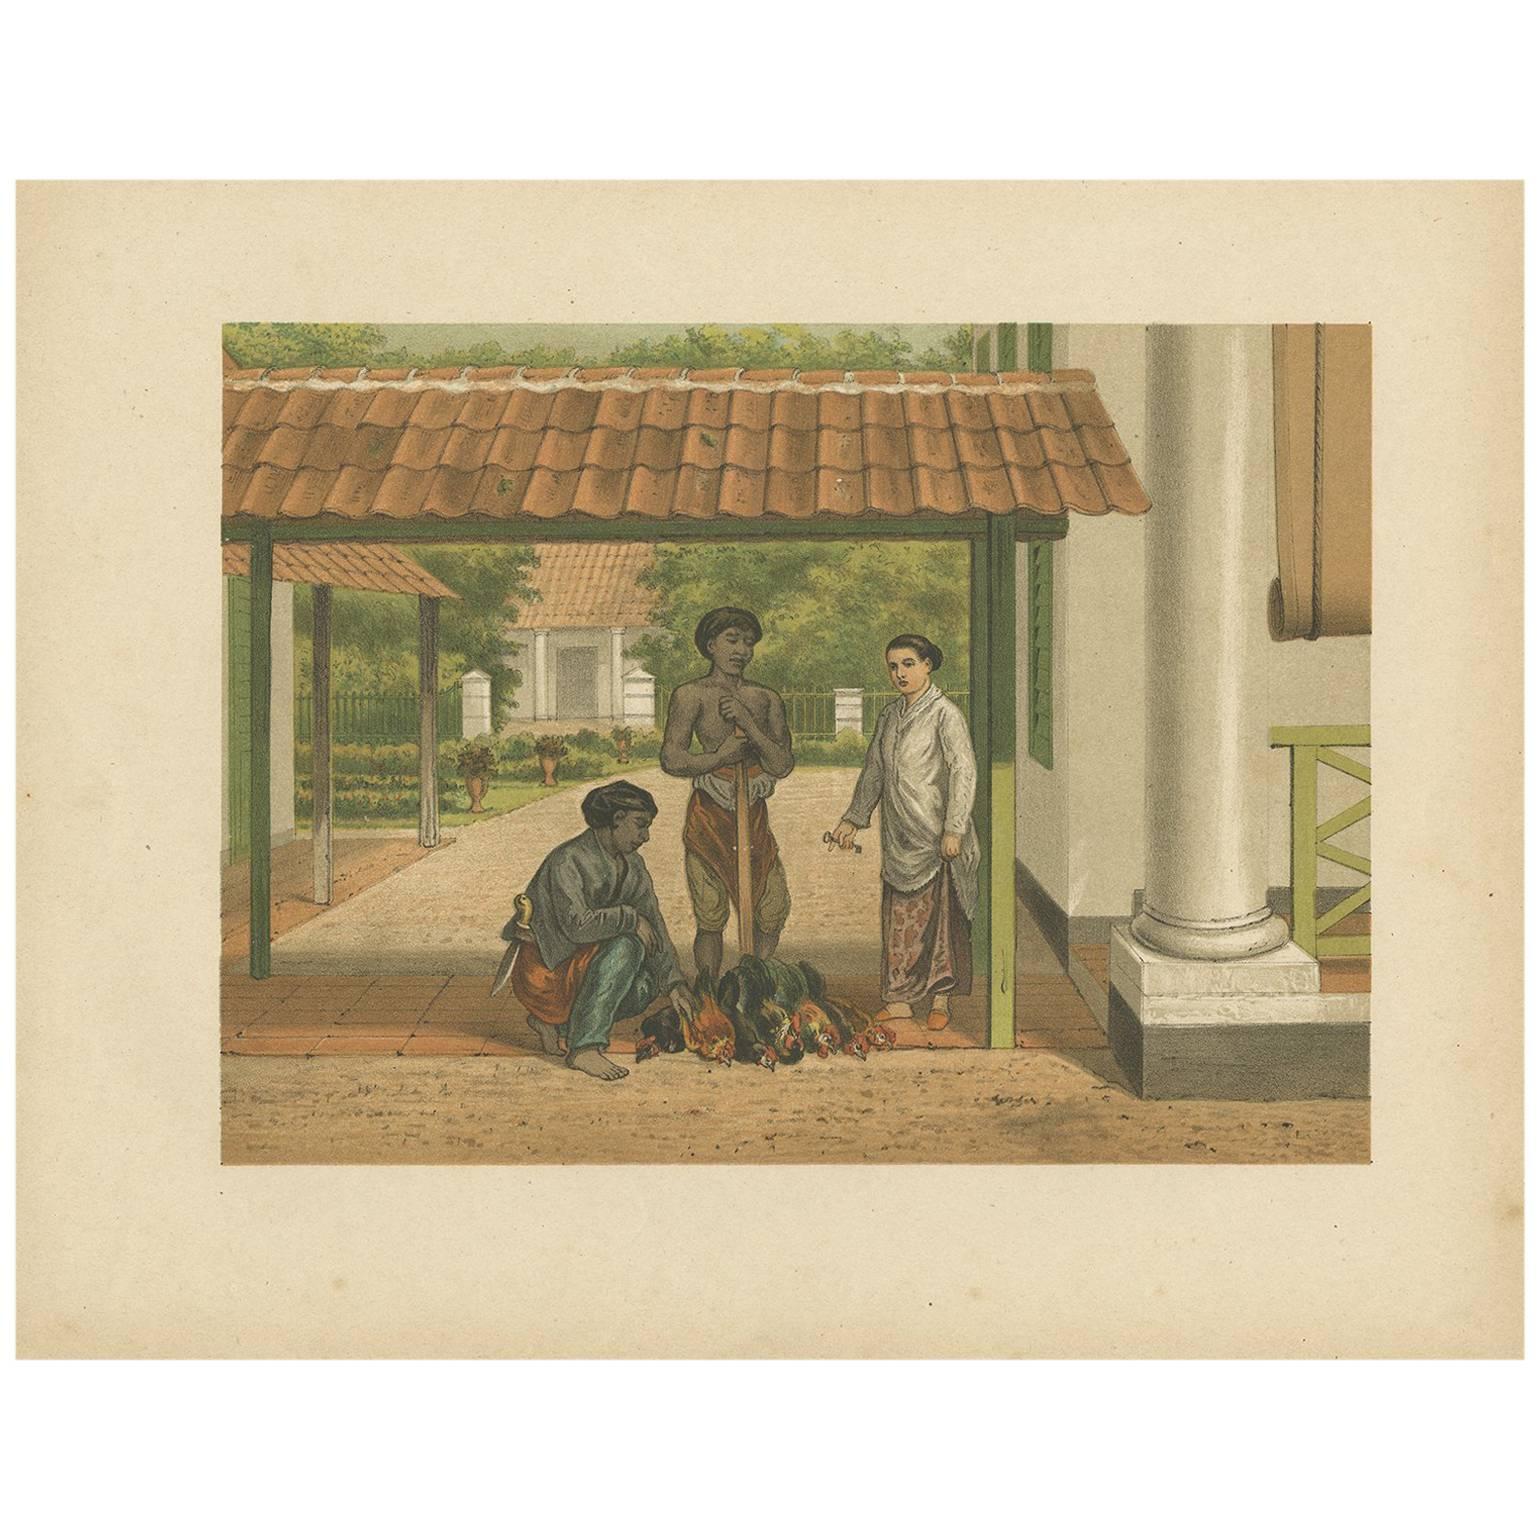 Antique Print of a Chicken Salesman in Batavia by M.T.H. Perelaer, 1888